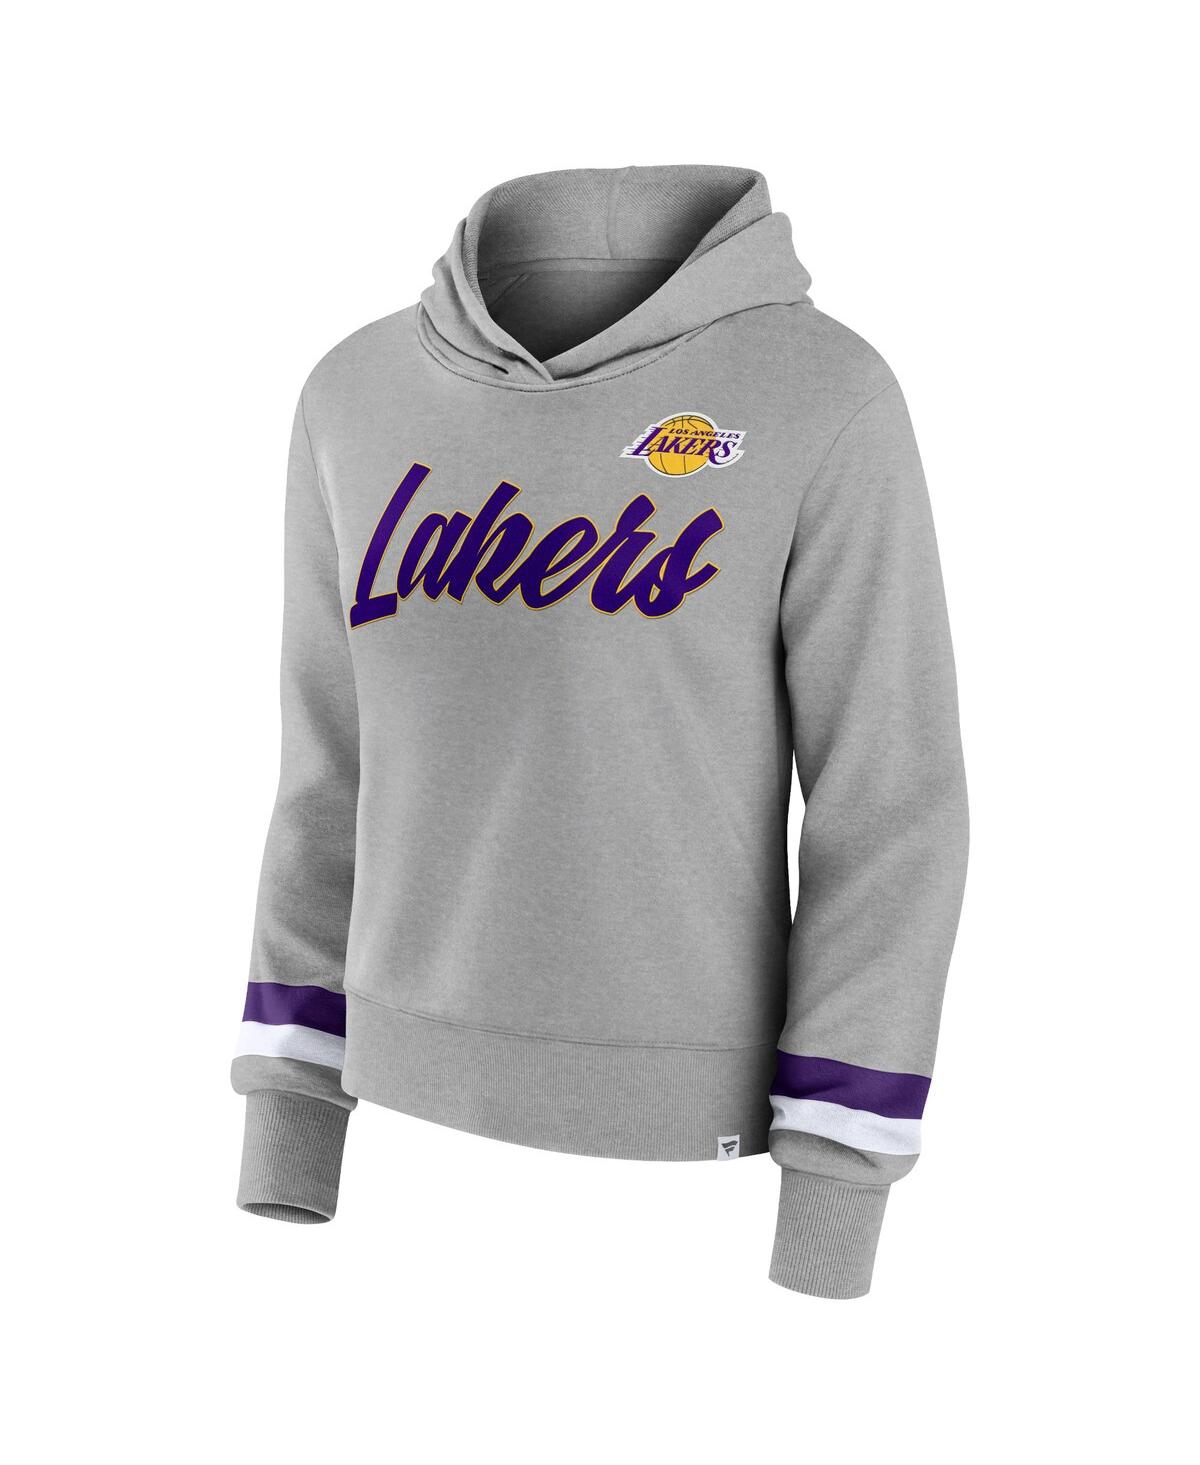 Shop Fanatics Women's  Heather Gray Los Angeles Lakers Halftime Pullover Hoodie